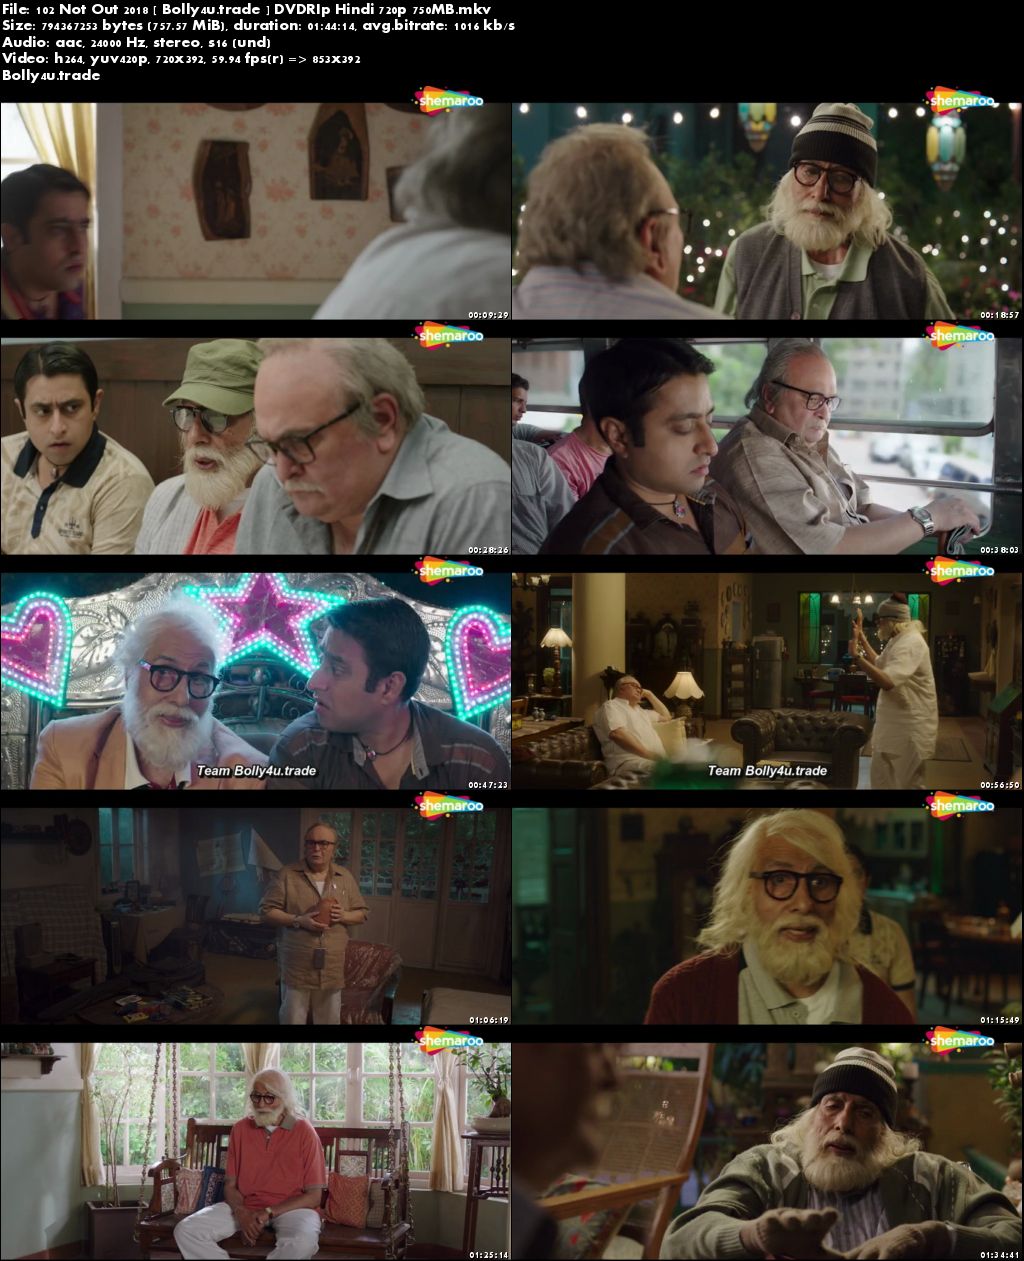 102 Not Out 2018 DVDRip 300MB Full Hindi Movie Download 480p